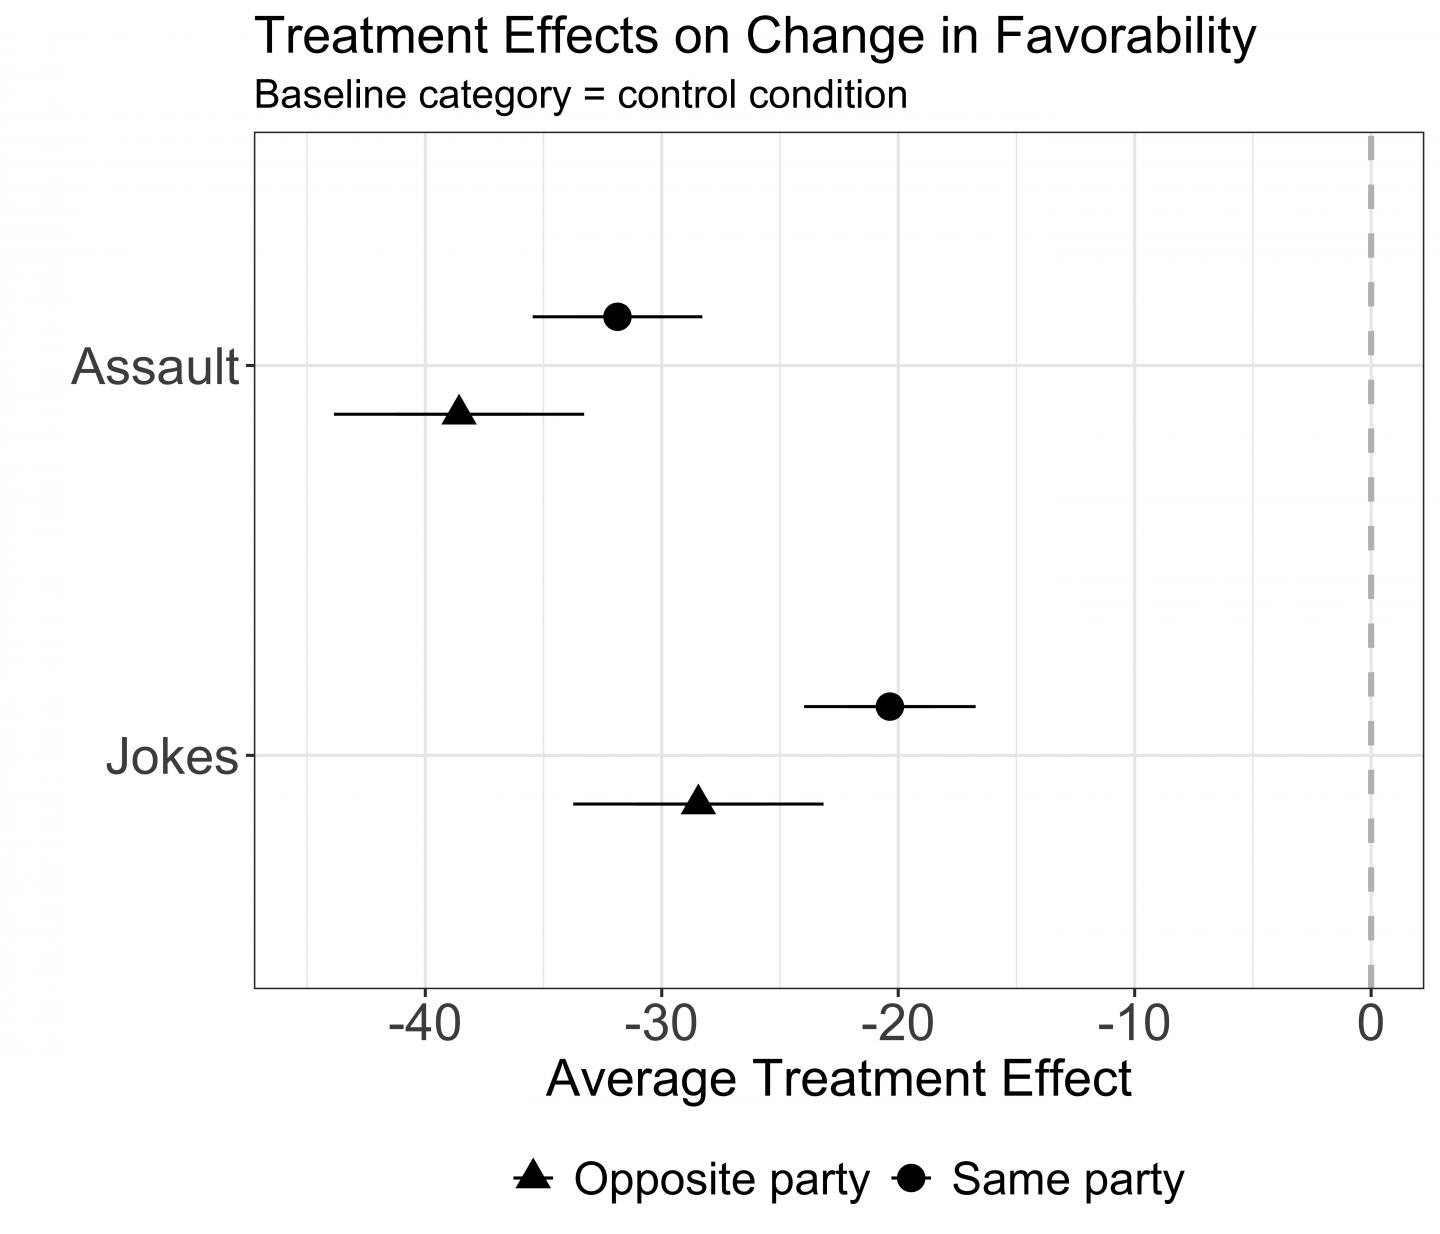 Treatment Effects on Percent Change in Favorability from Pretest to Posttest